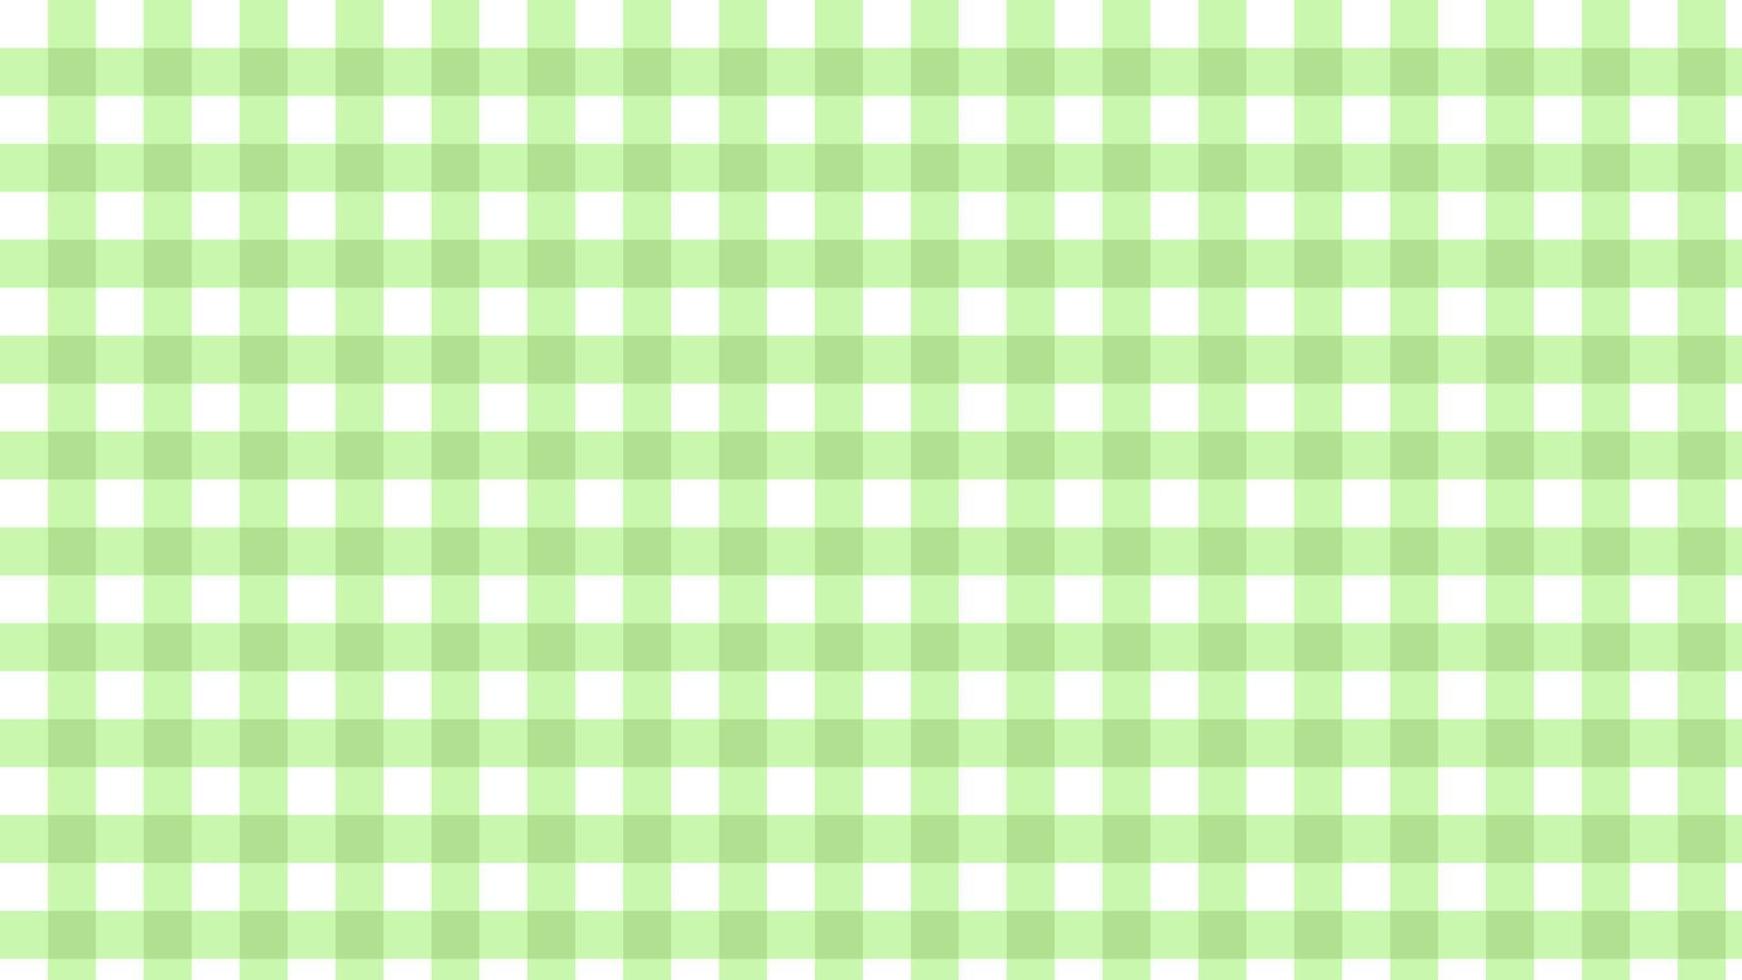 aesthetic cute pastel green gingham, checkerboard, plaid, tartan pattern background illustration, perfect for wallpaper, backdrop, postcard, background for your design